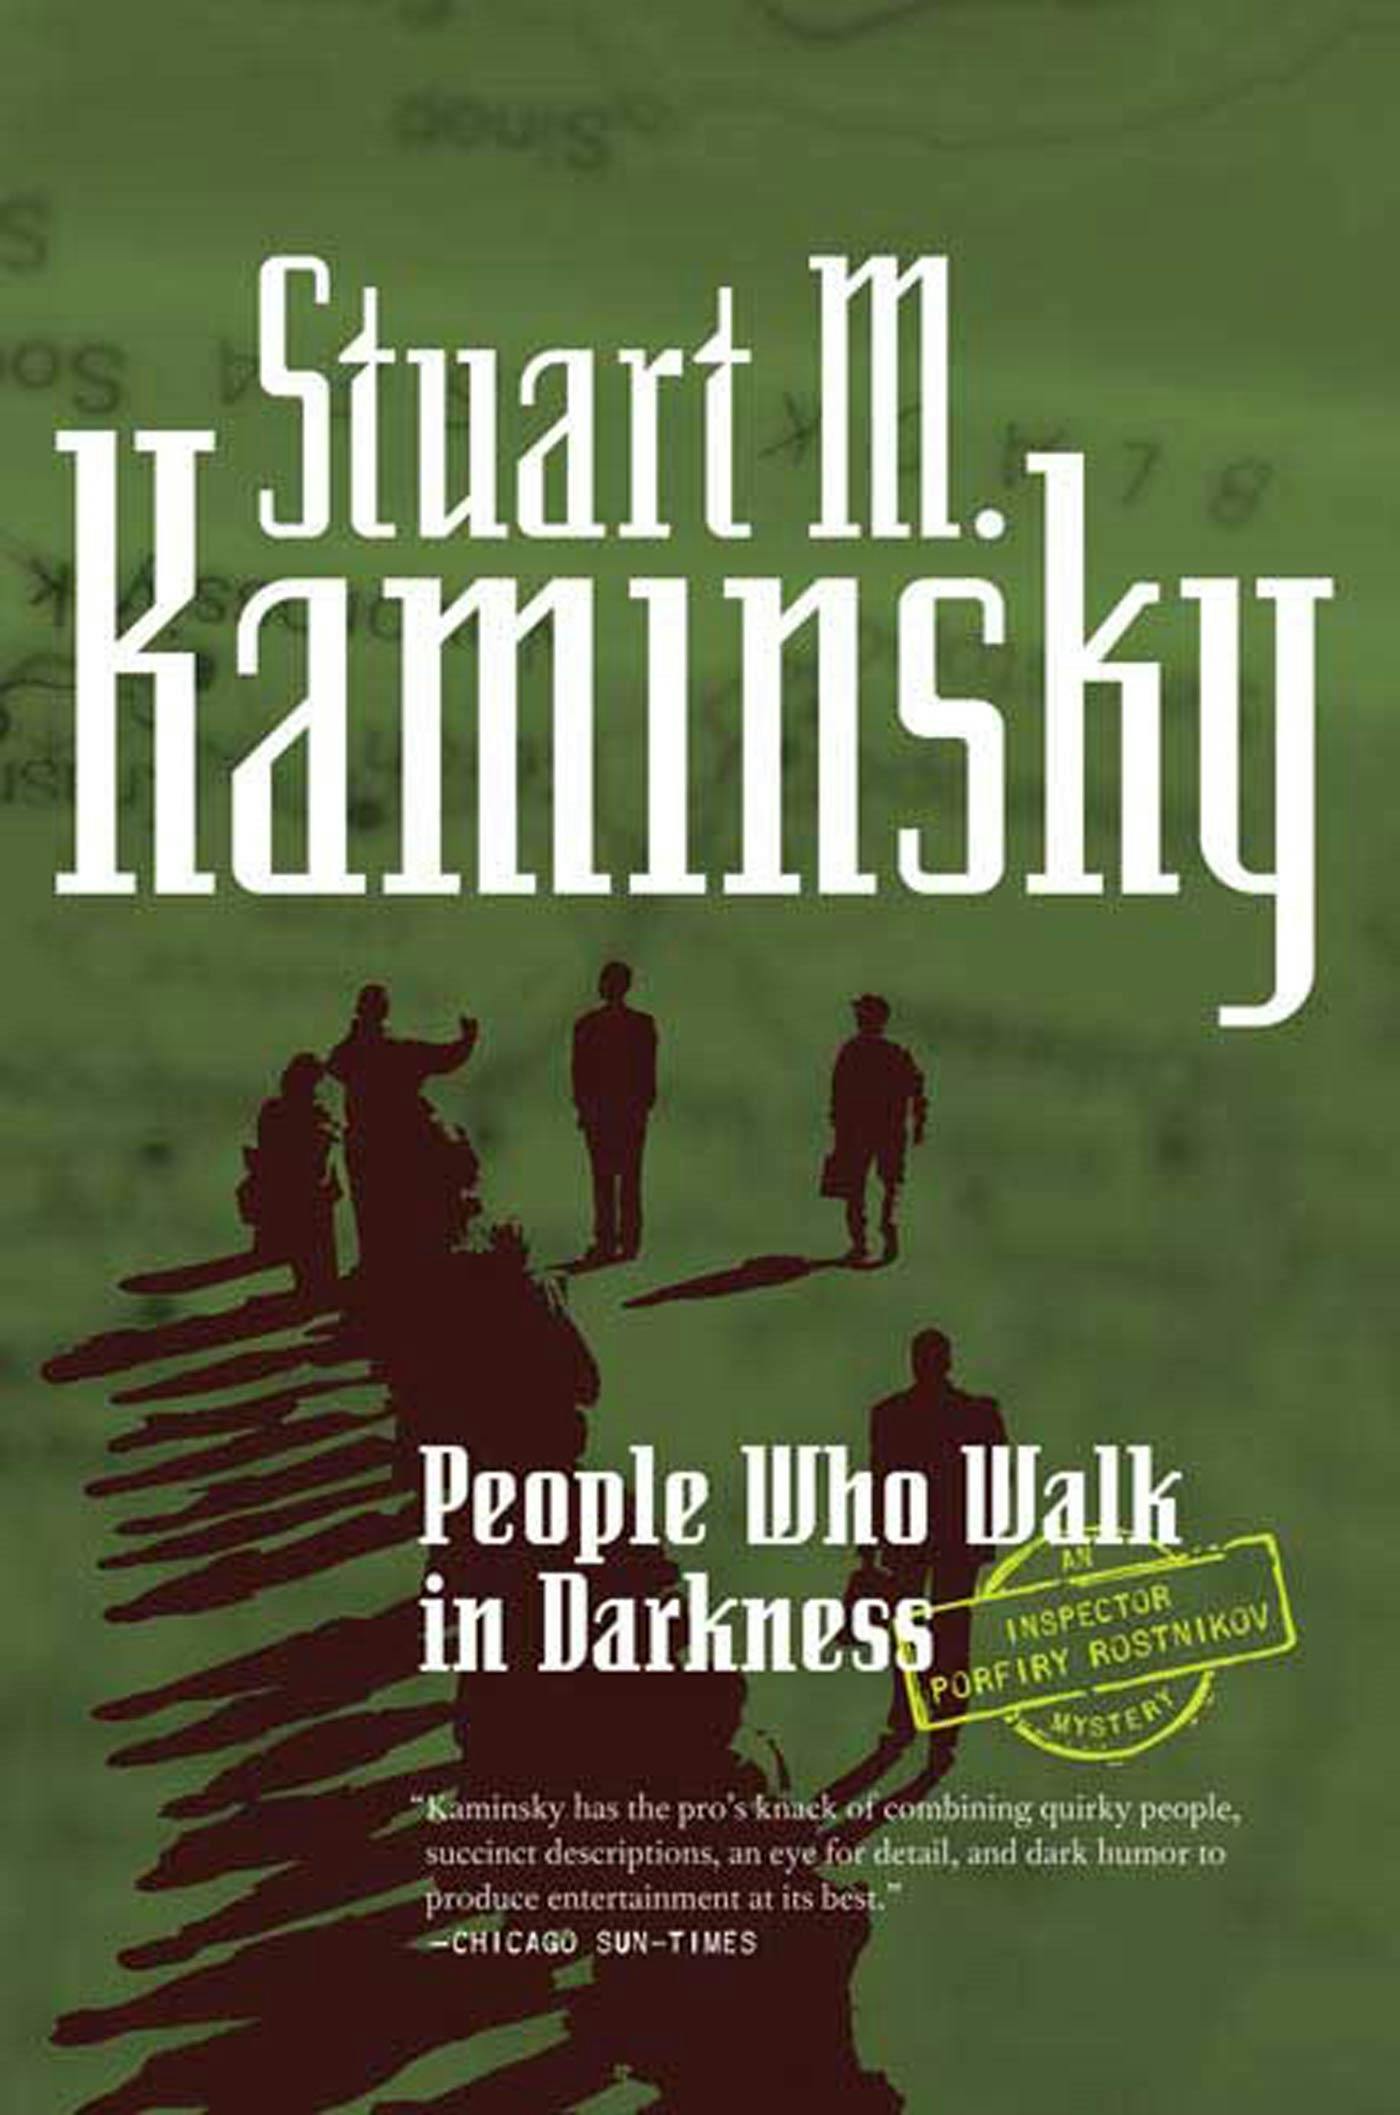 Cover for the book titled as: People Who Walk In Darkness